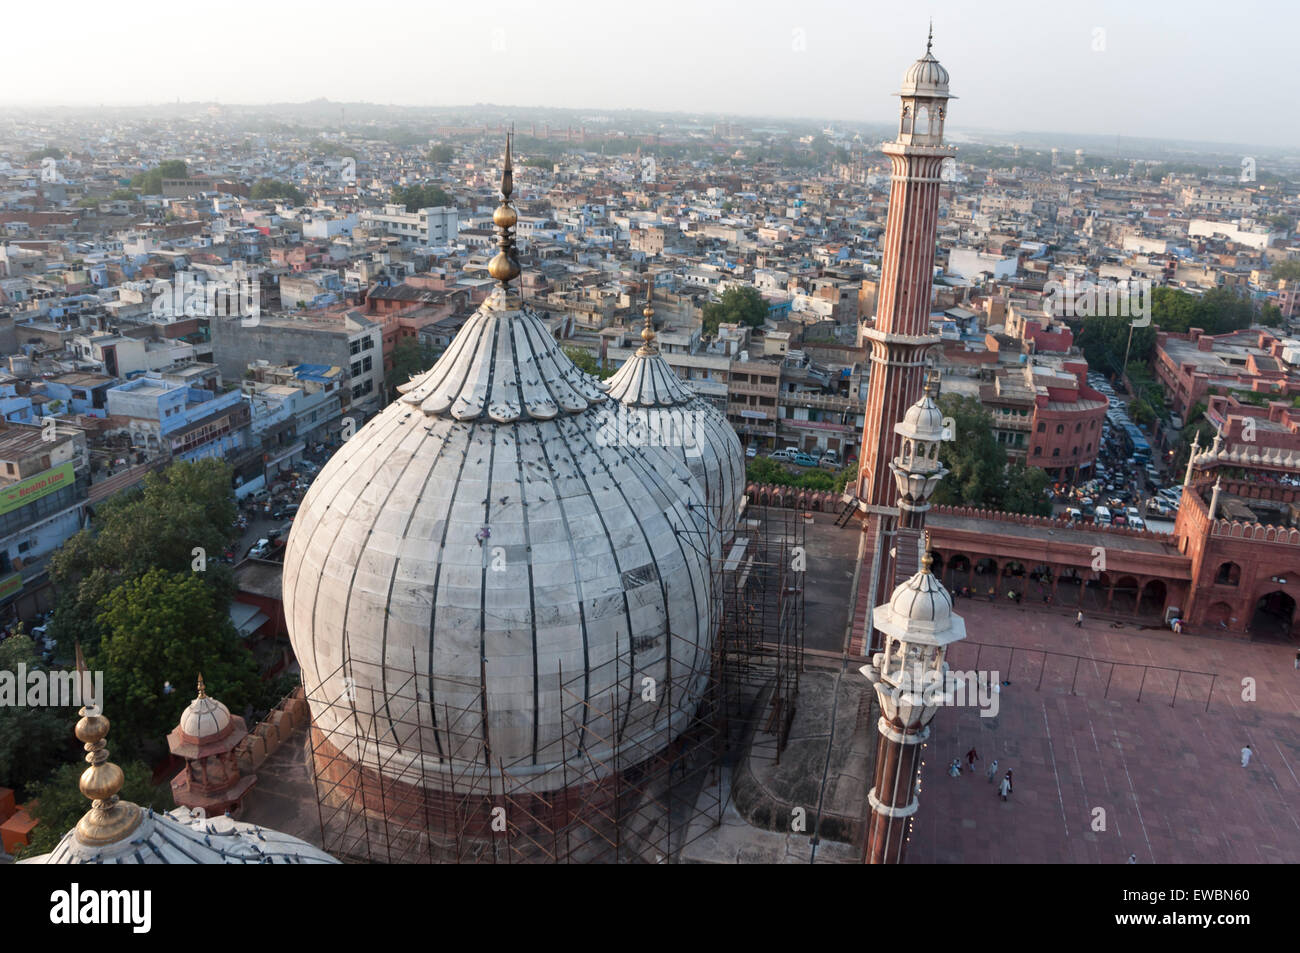 Domes and minarets at the Jama Masjid mosque in old Delhi, India. Stock Photo